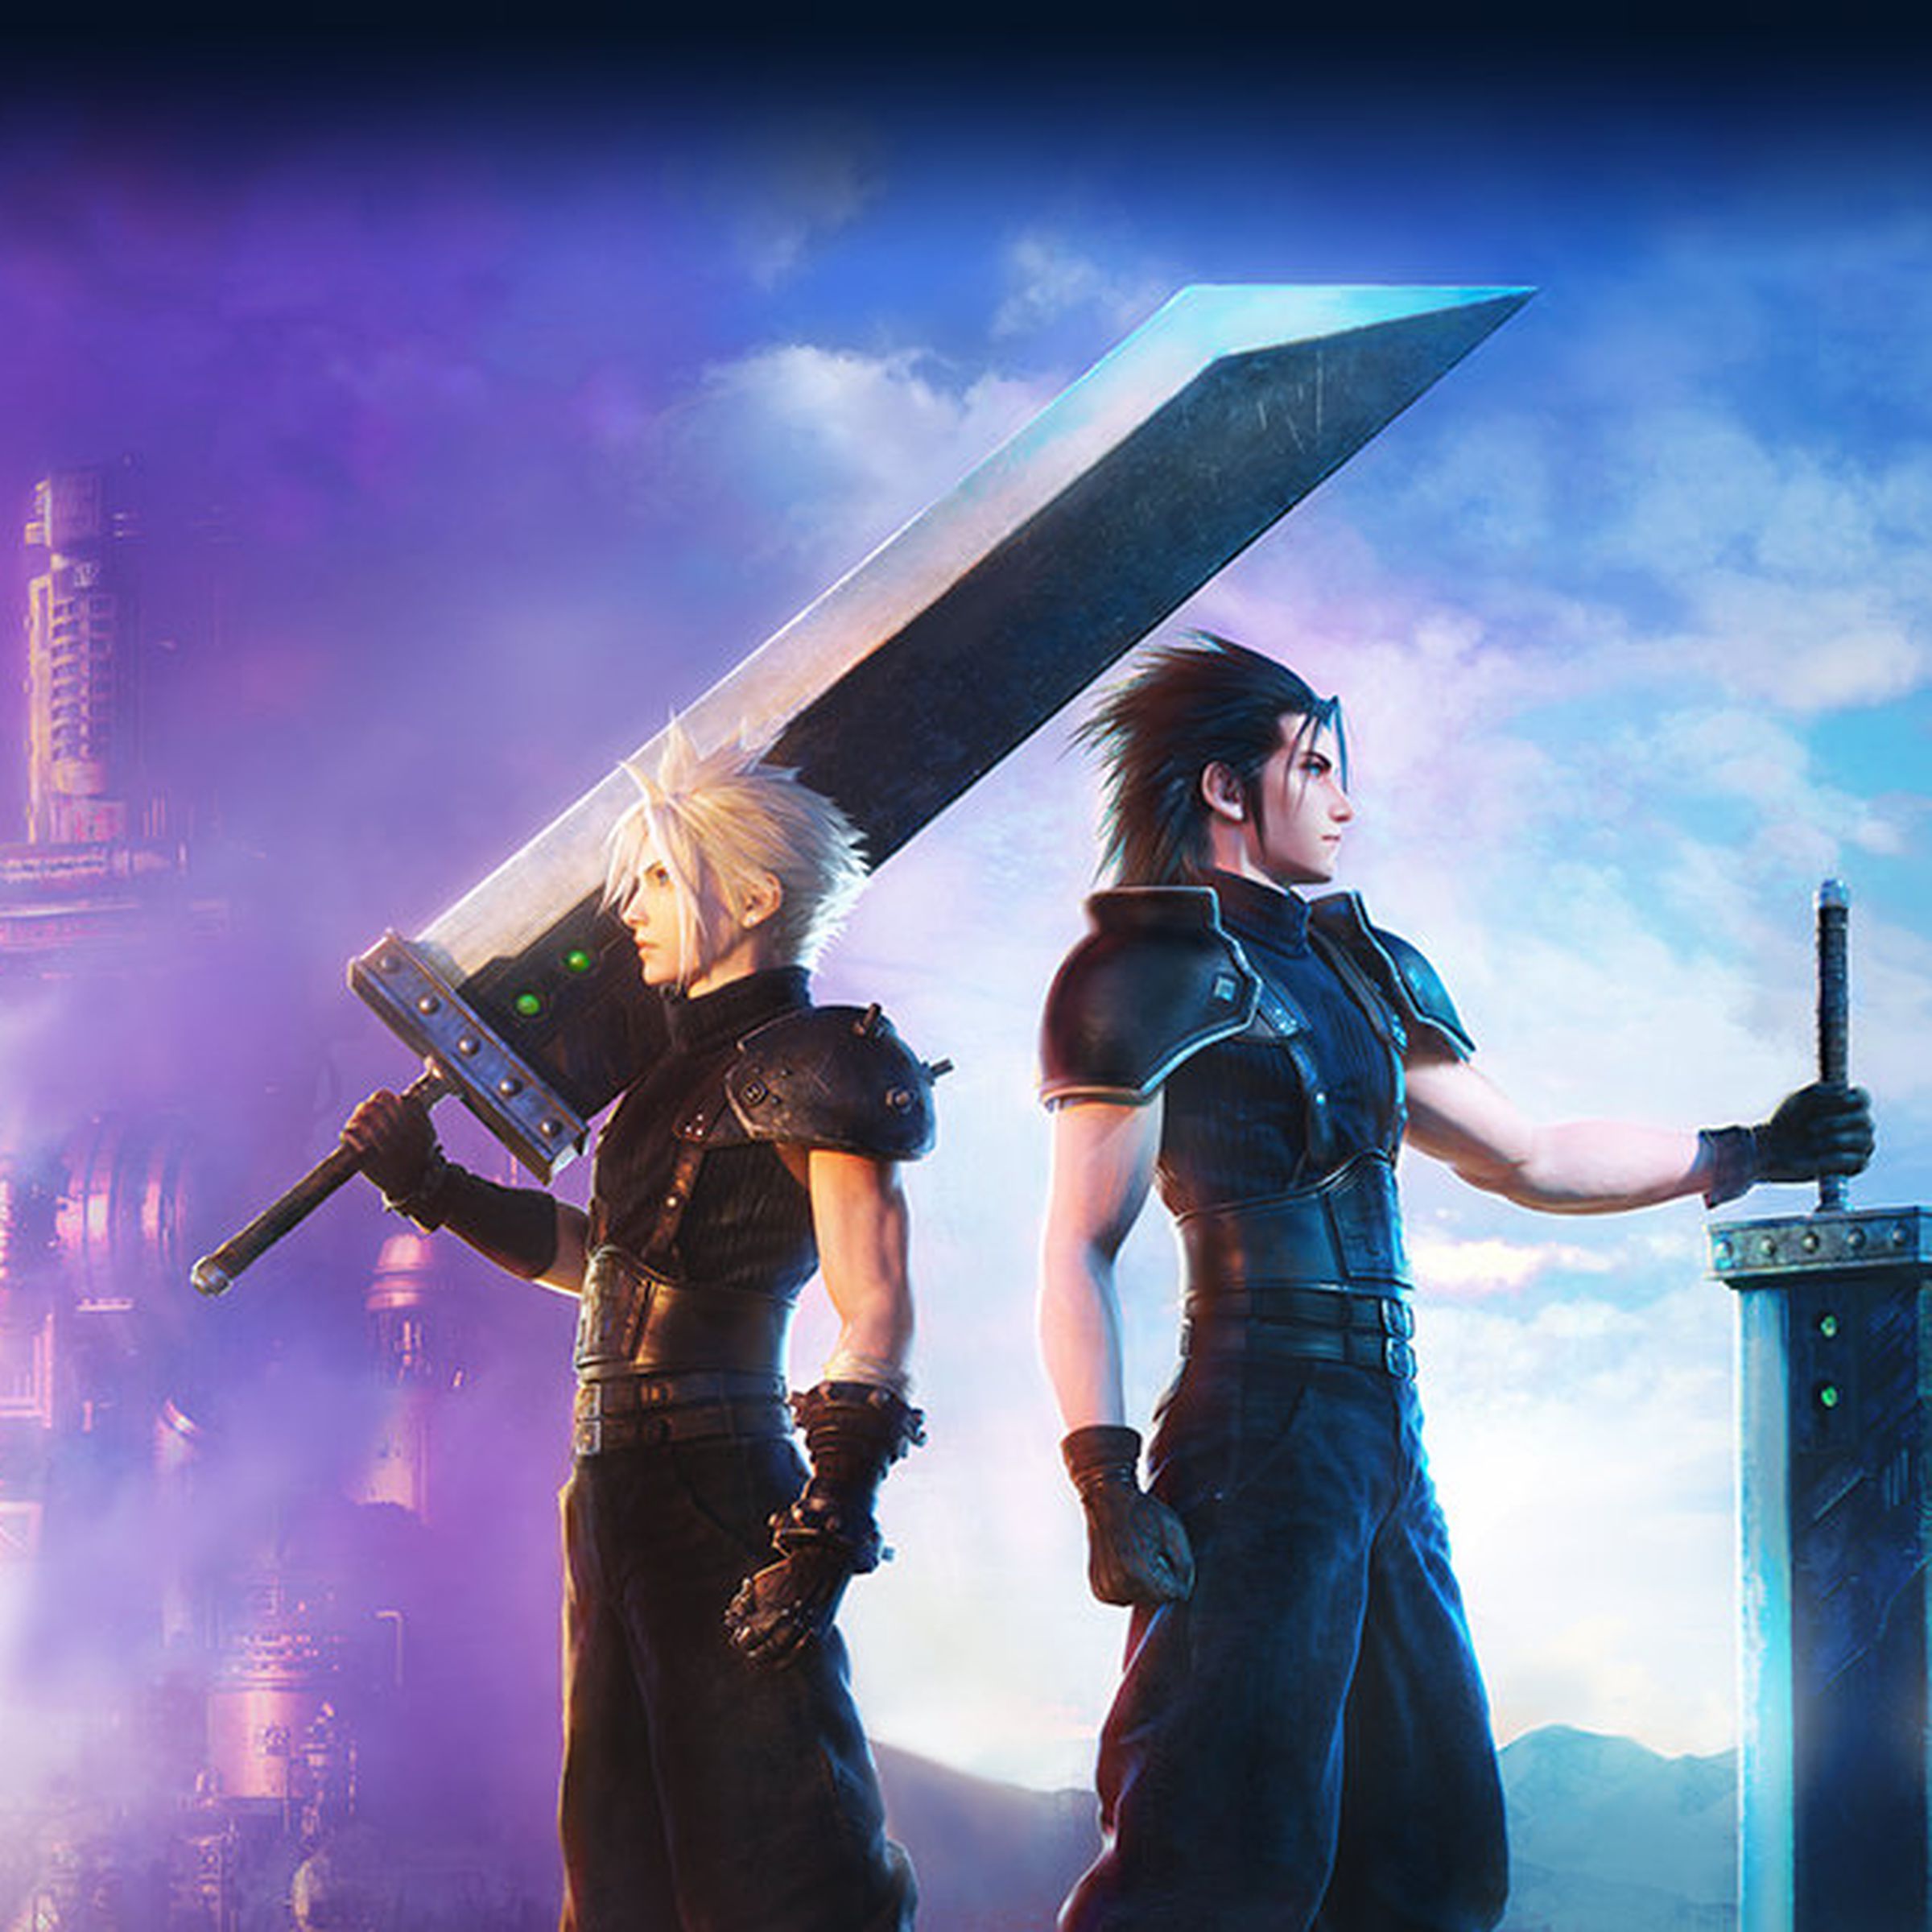 Promotional art for Final Fantasy VII Ever Crisis featuring Cloud Strife and Zack Fair.